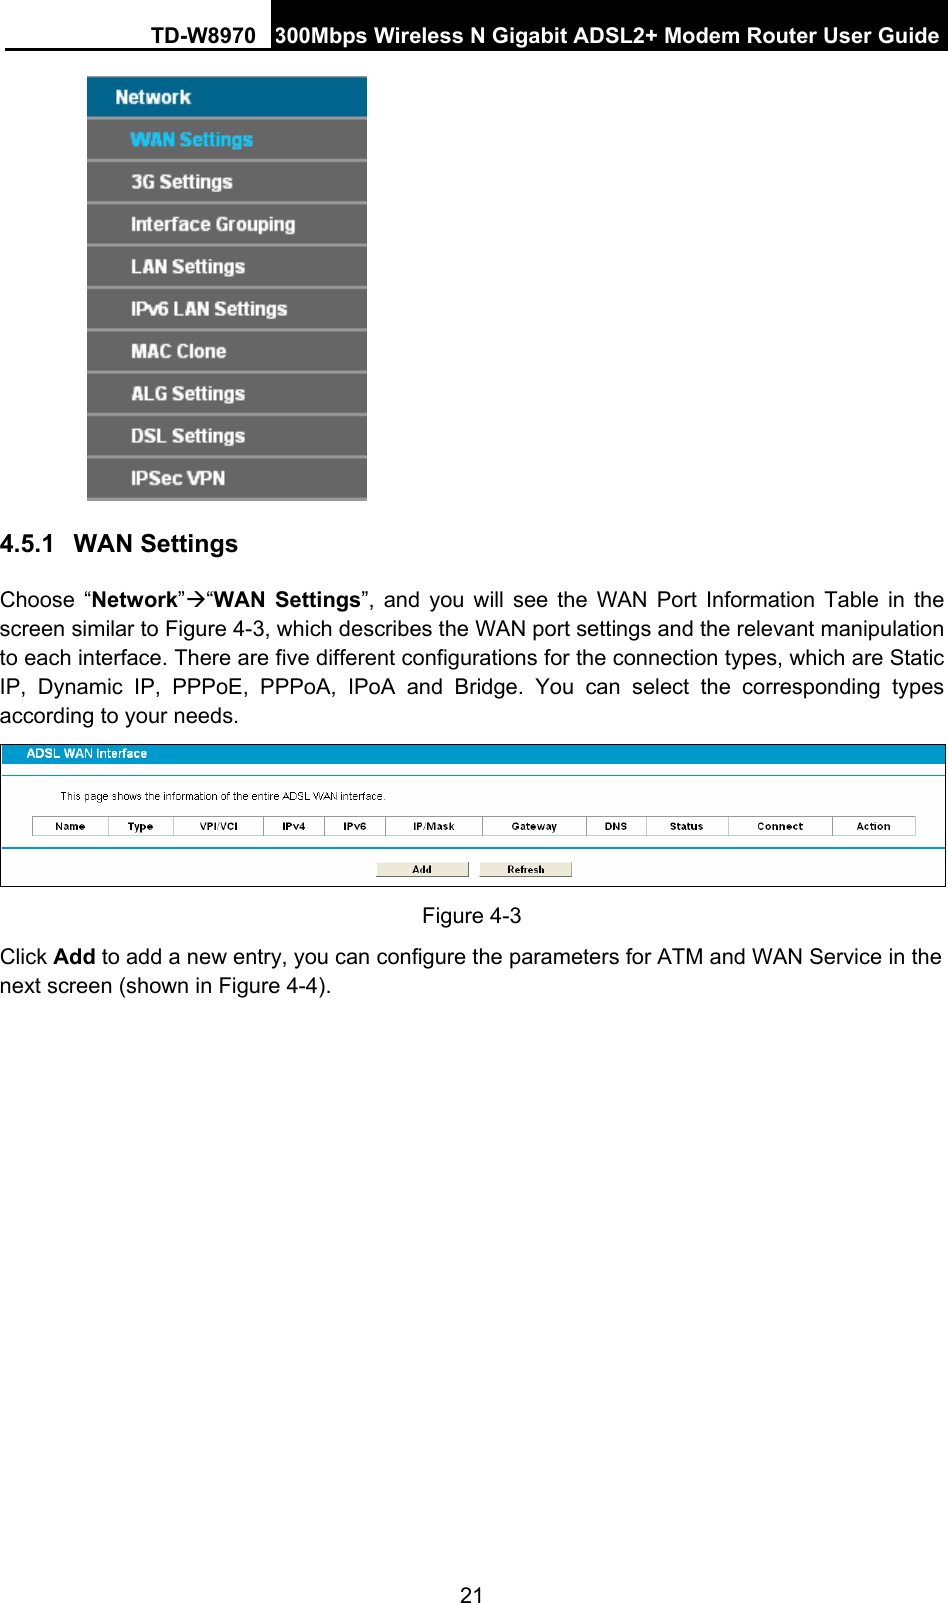 TD-W8970 300Mbps Wireless N Gigabit ADSL2+ Modem Router User Guide 21  4.5.1  WAN Settings Choose “Network”Æ“WAN Settings”, and you will see the WAN Port Information Table in the screen similar to Figure 4-3, which describes the WAN port settings and the relevant manipulation to each interface. There are five different configurations for the connection types, which are Static IP, Dynamic IP, PPPoE, PPPoA, IPoA and Bridge. You can select the corresponding types according to your needs.    Figure 4-3 Click Add to add a new entry, you can configure the parameters for ATM and WAN Service in the next screen (shown in Figure 4-4). 